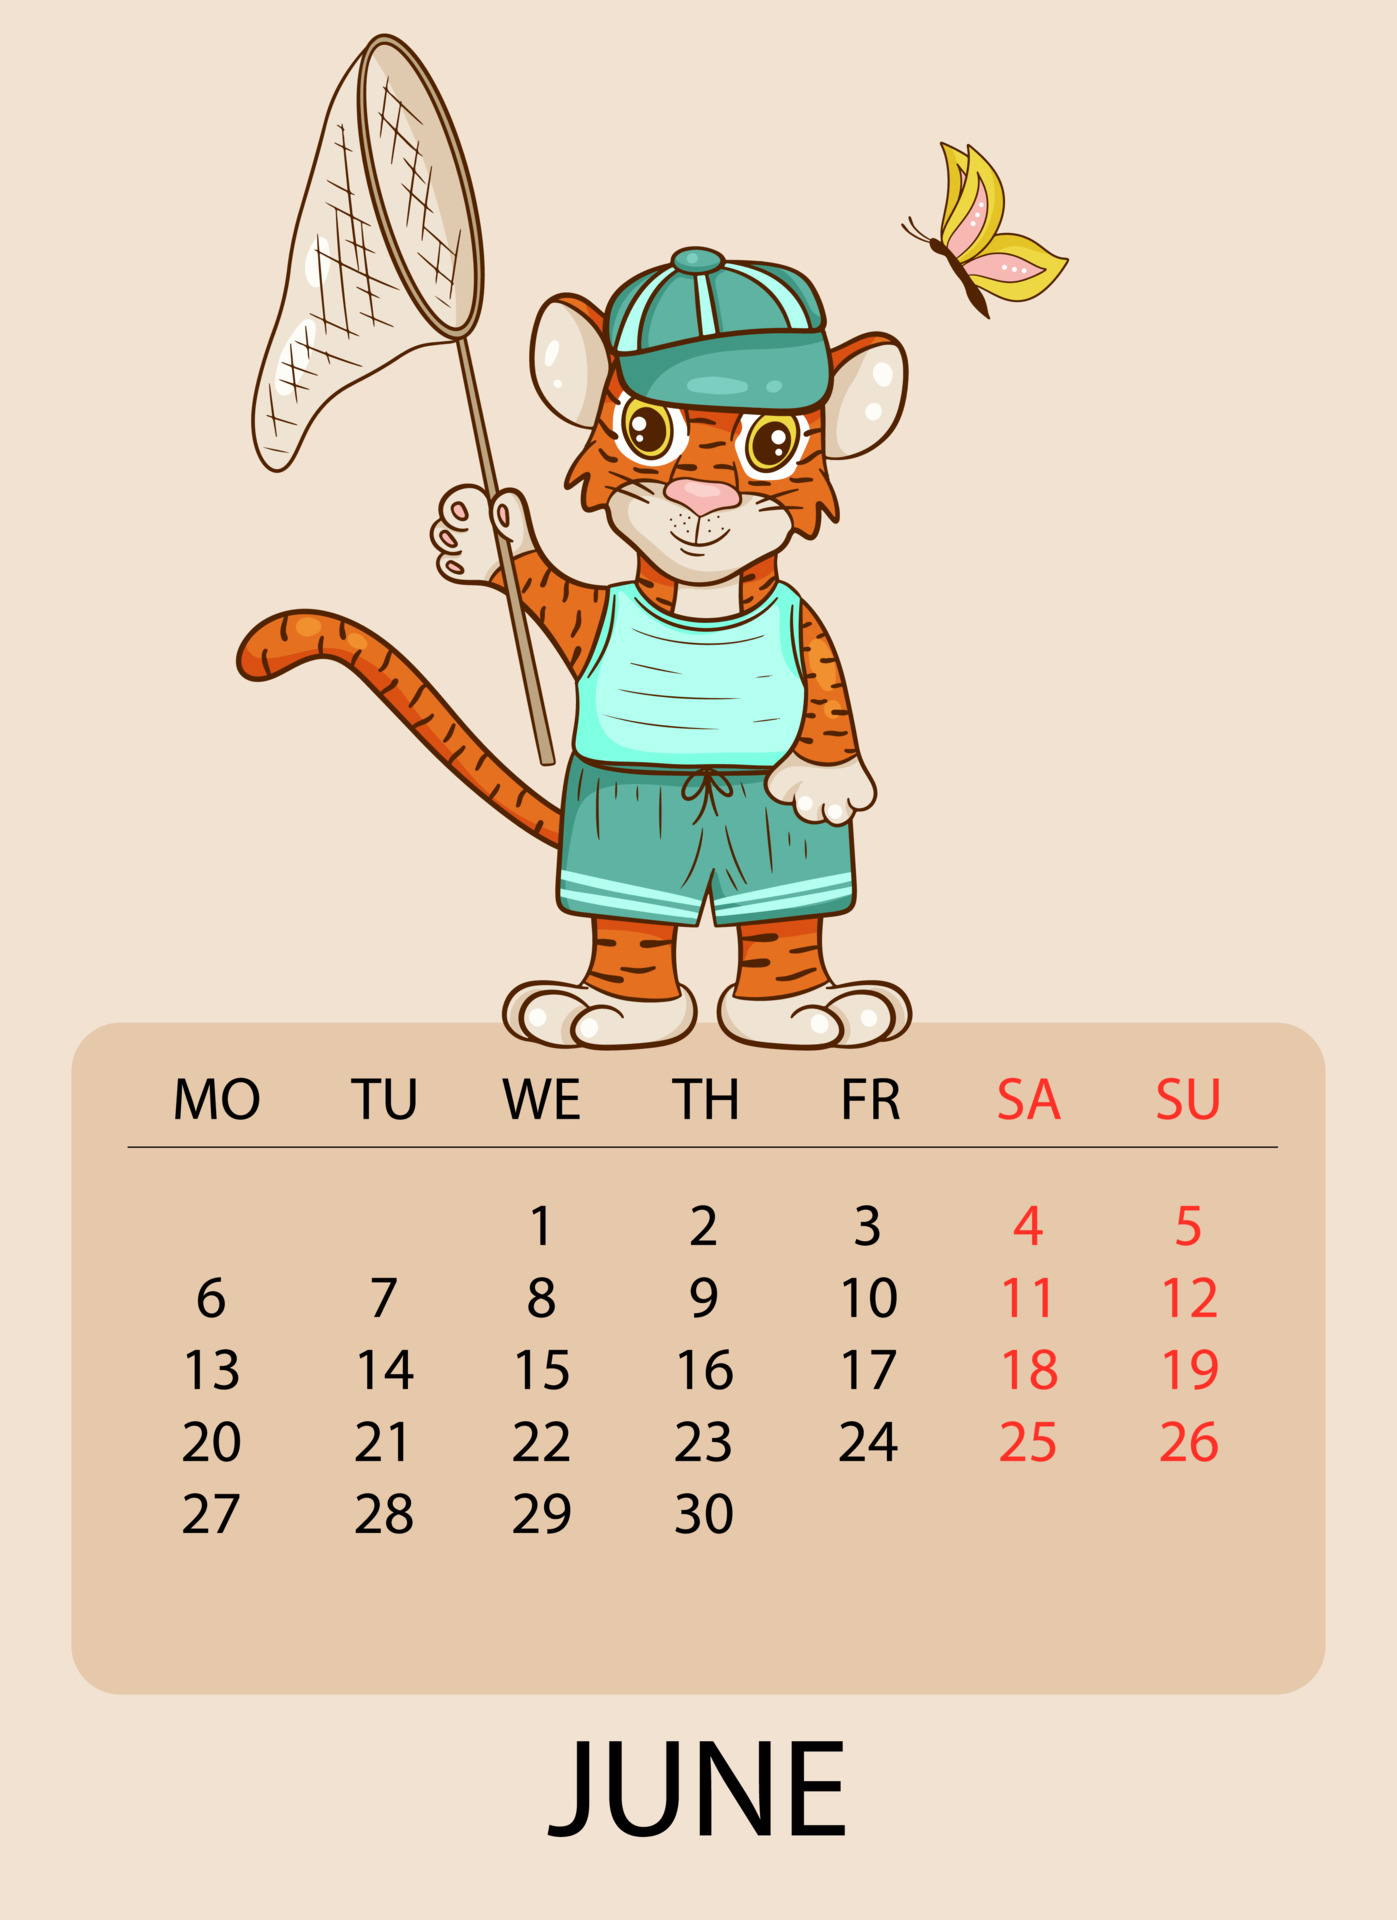 Calendar Design Template For June 2022, The Year Of The Tiger According To The Chinese Or Eastern Calendar, With An Illustration Of Tiger With Butterflies. Table With Calendar For June 2022. Vector